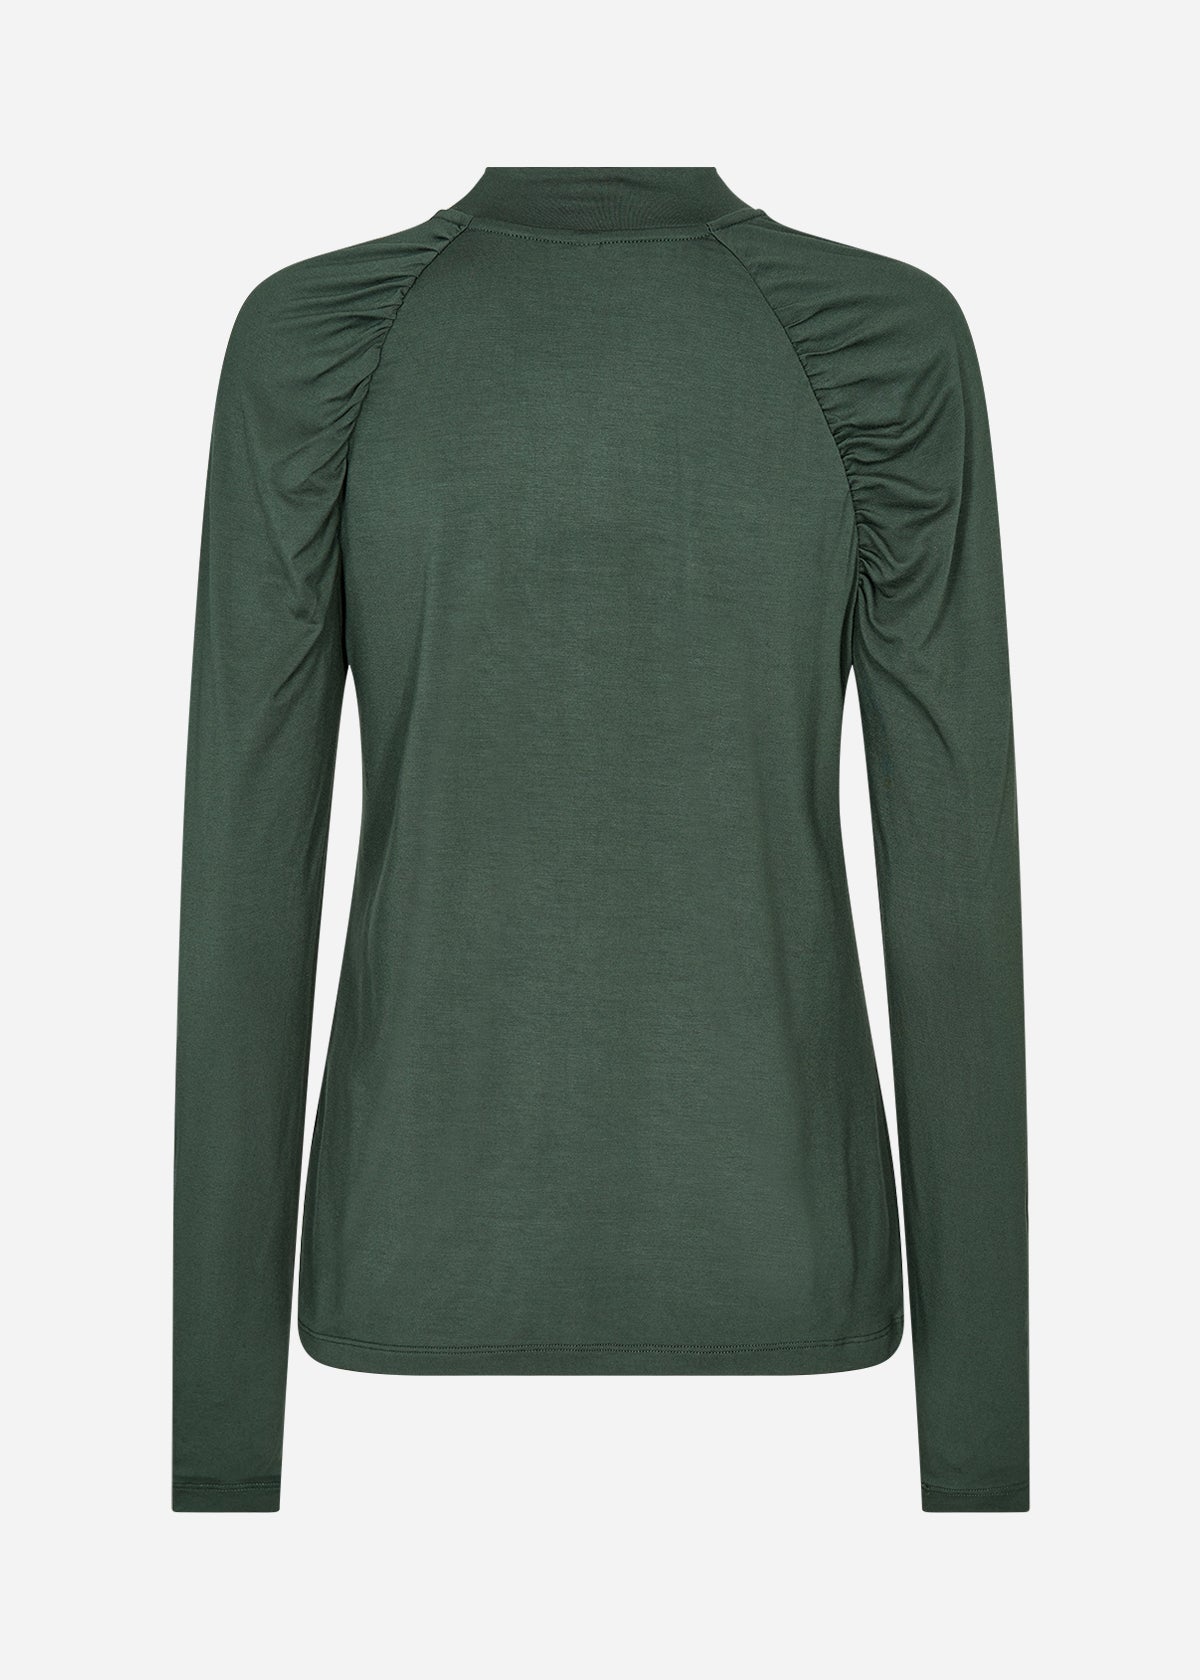 The Holly Top in Forest Green